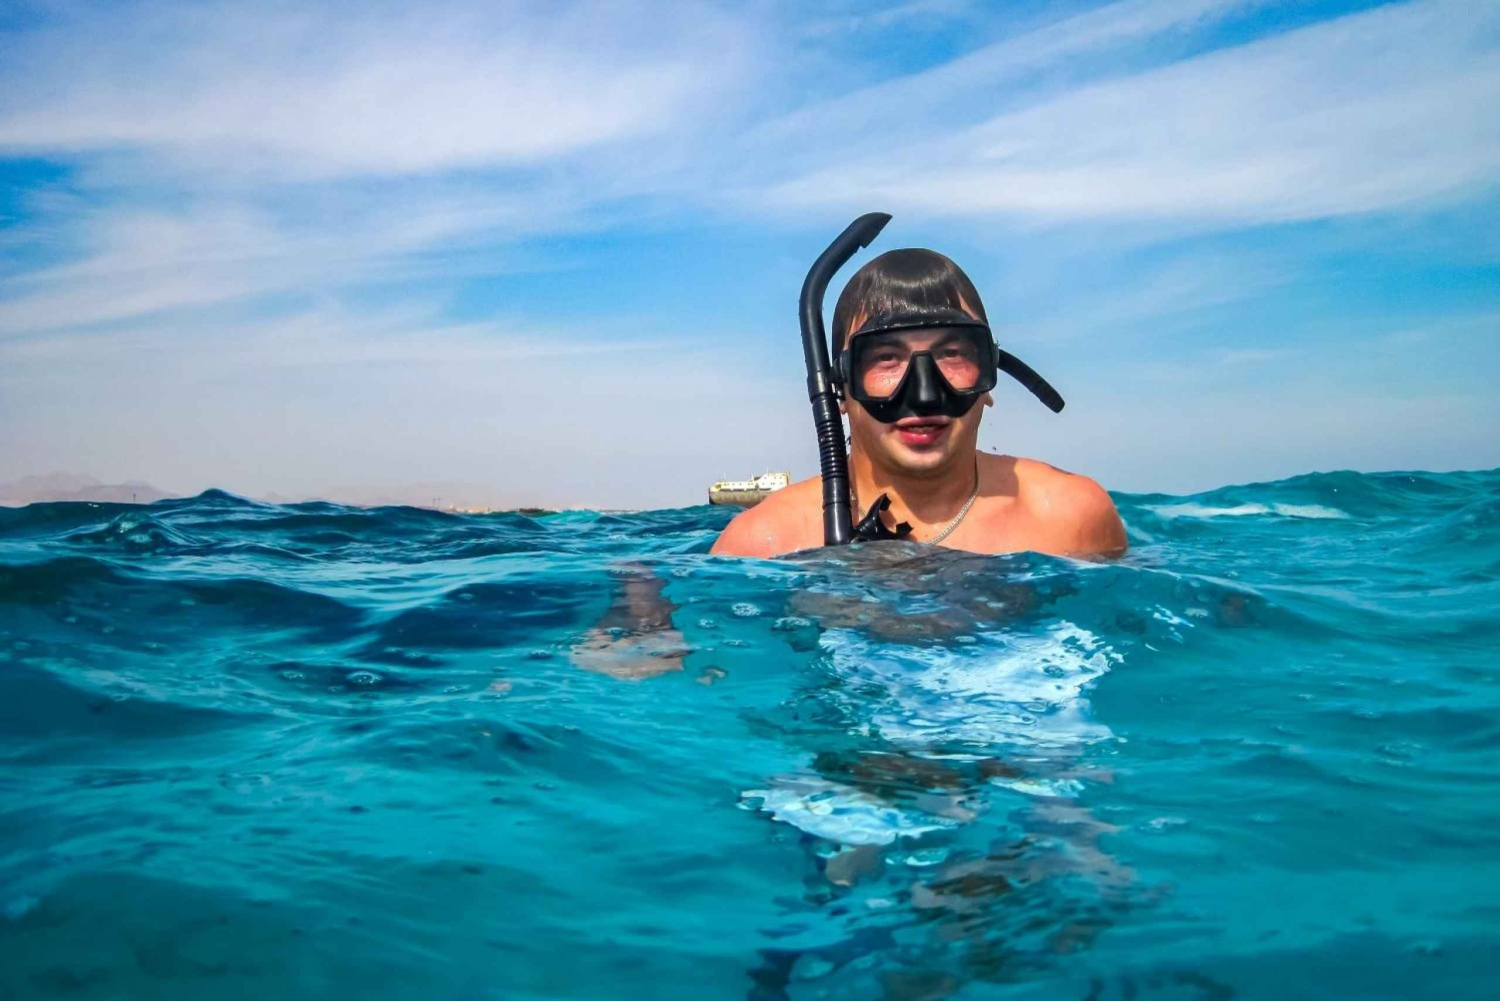 Sharm: Snorkel from the Shore, Mangroove Trees & Salt Lake